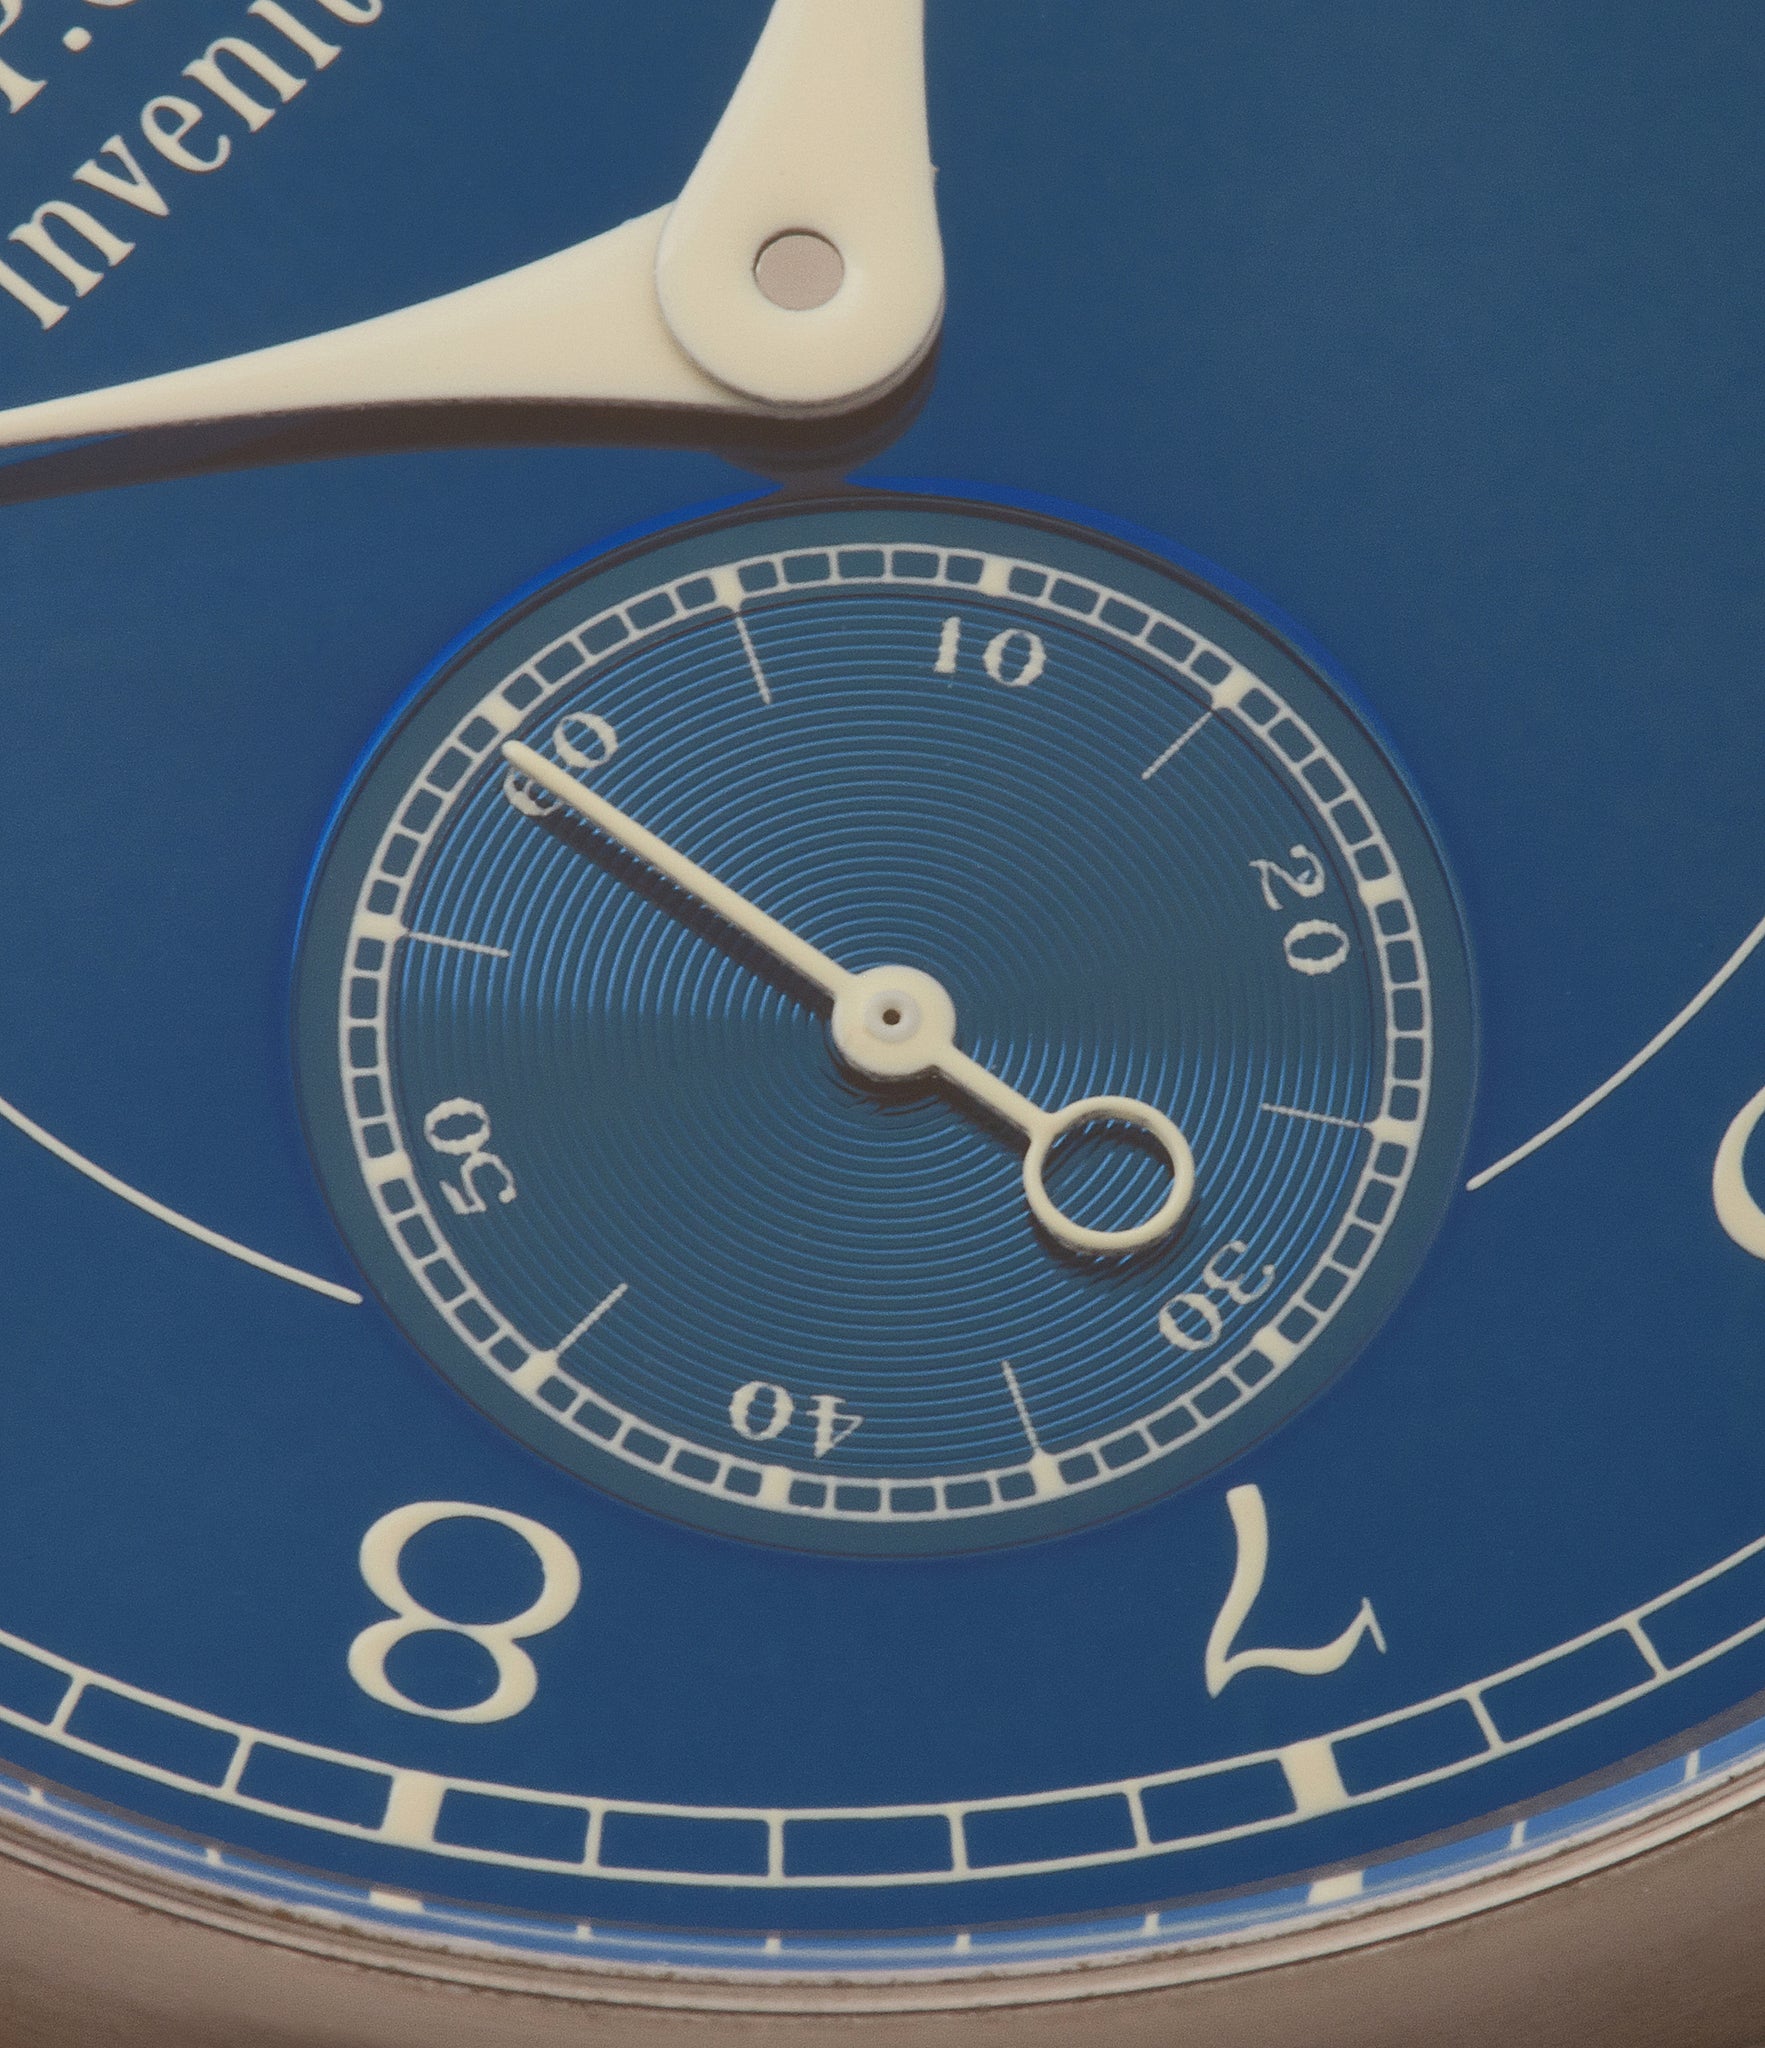 buy blue dial watch F. P. Journe Chronometre Bleu tantalum blue dial watch independent watchmaker for sale online at A Collected Man London UK specialist of rare watches 